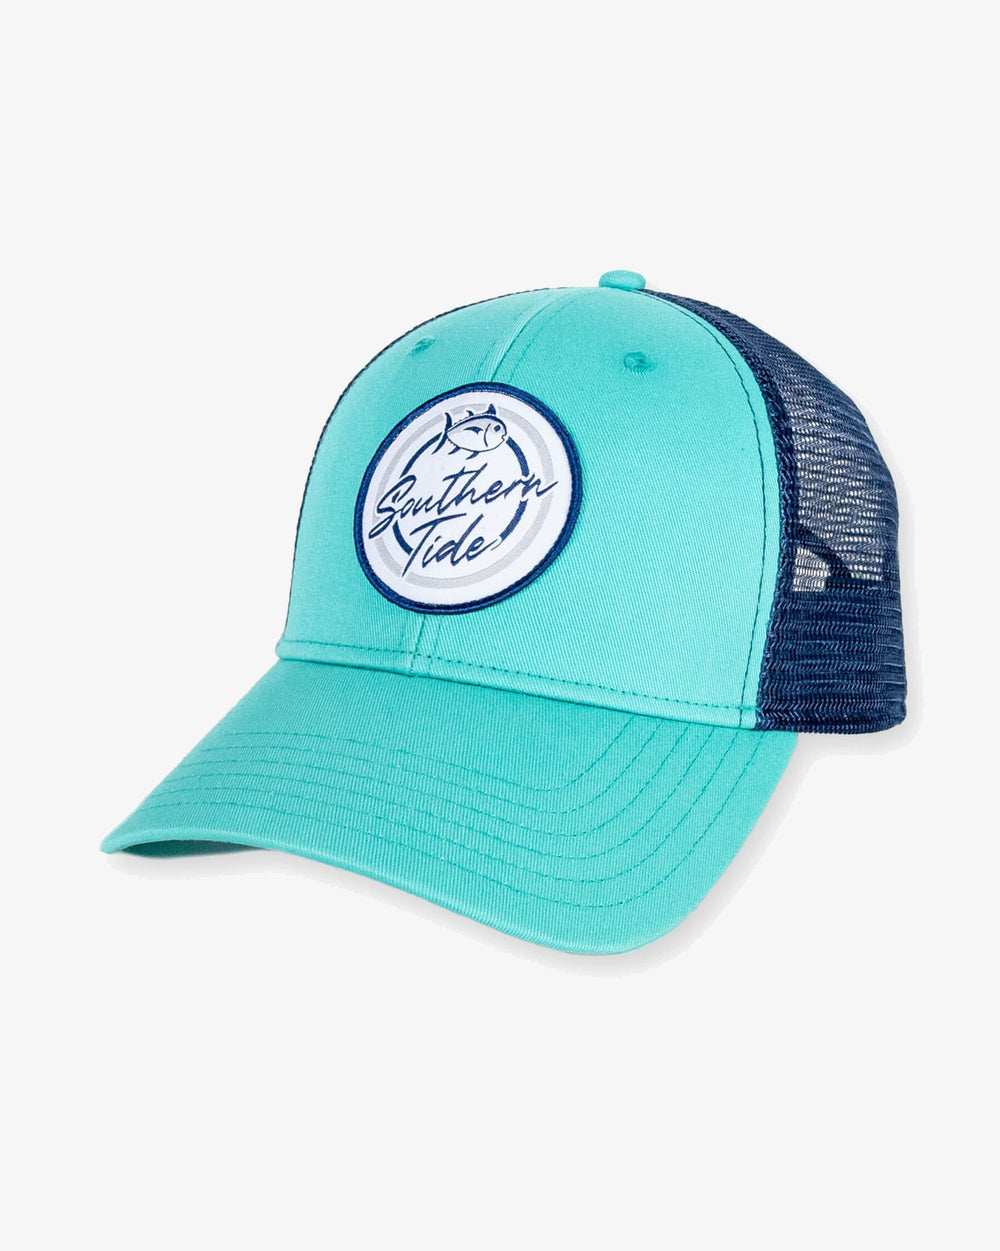 The front view of the Southern Tide Southern Tide Authentic Badge Trucker Hat by Southern Tide - Green